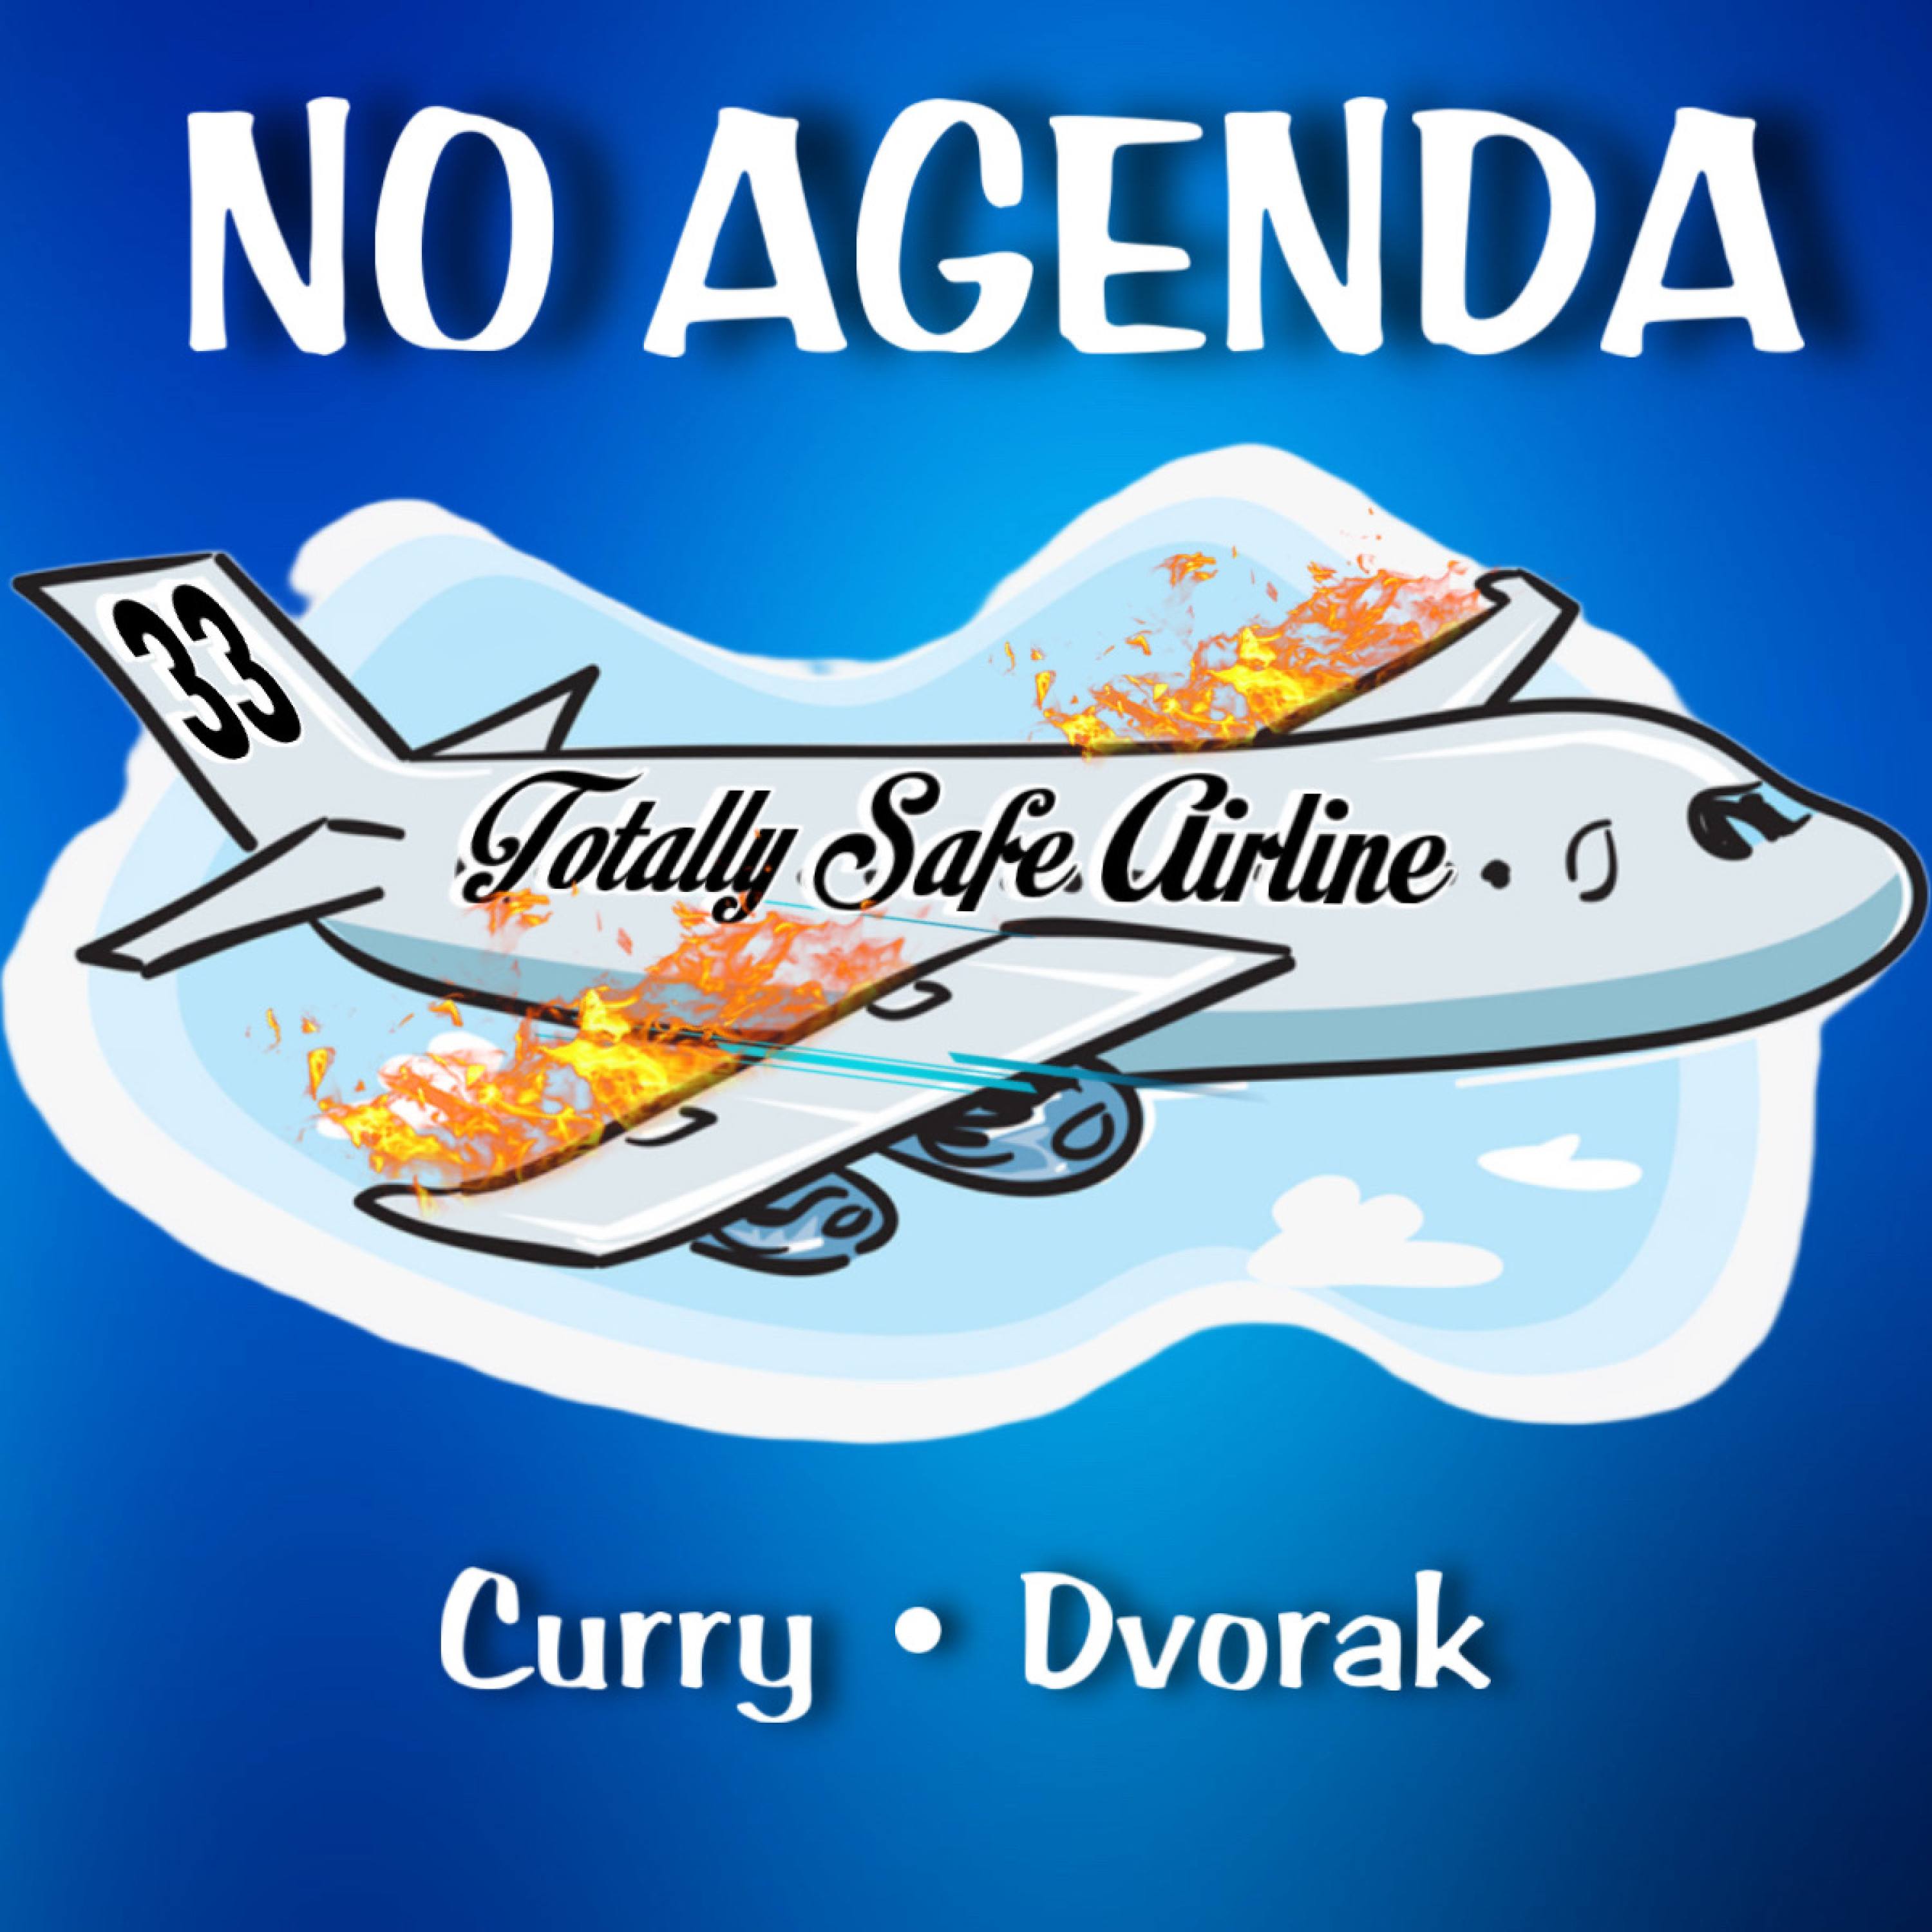 Totally Safe Airlines by Dame Kenny-Ben  for 